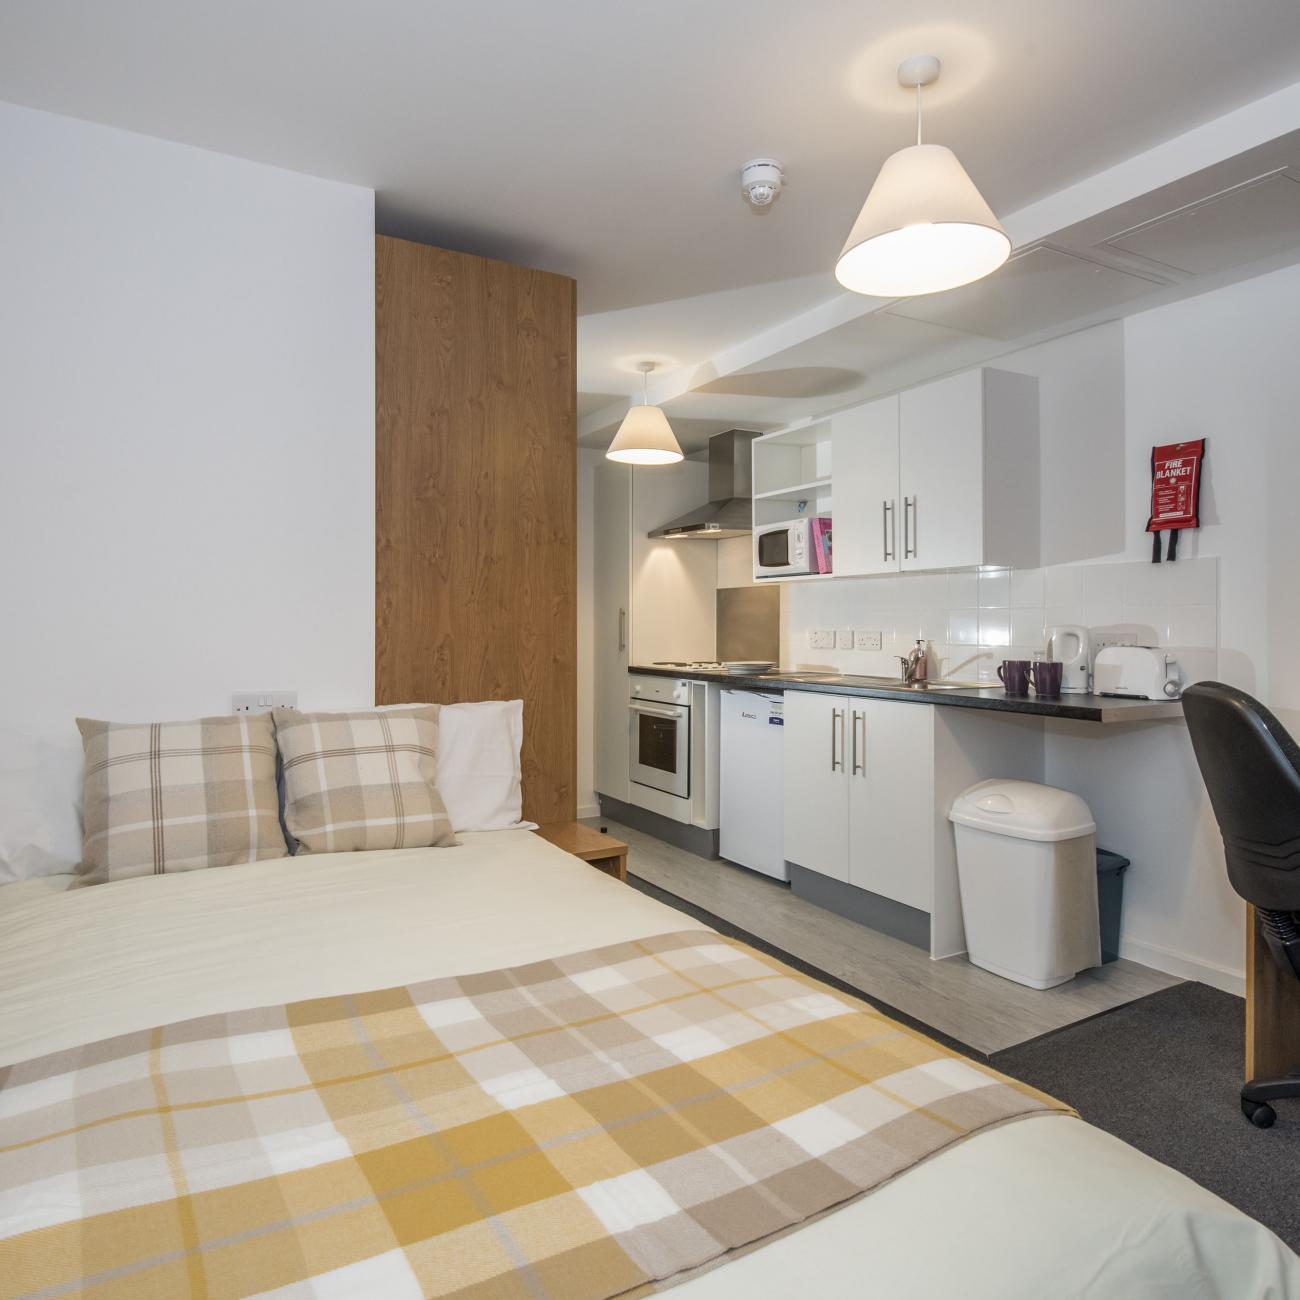 A modern studio flat showing bed, desk and kitchenette.